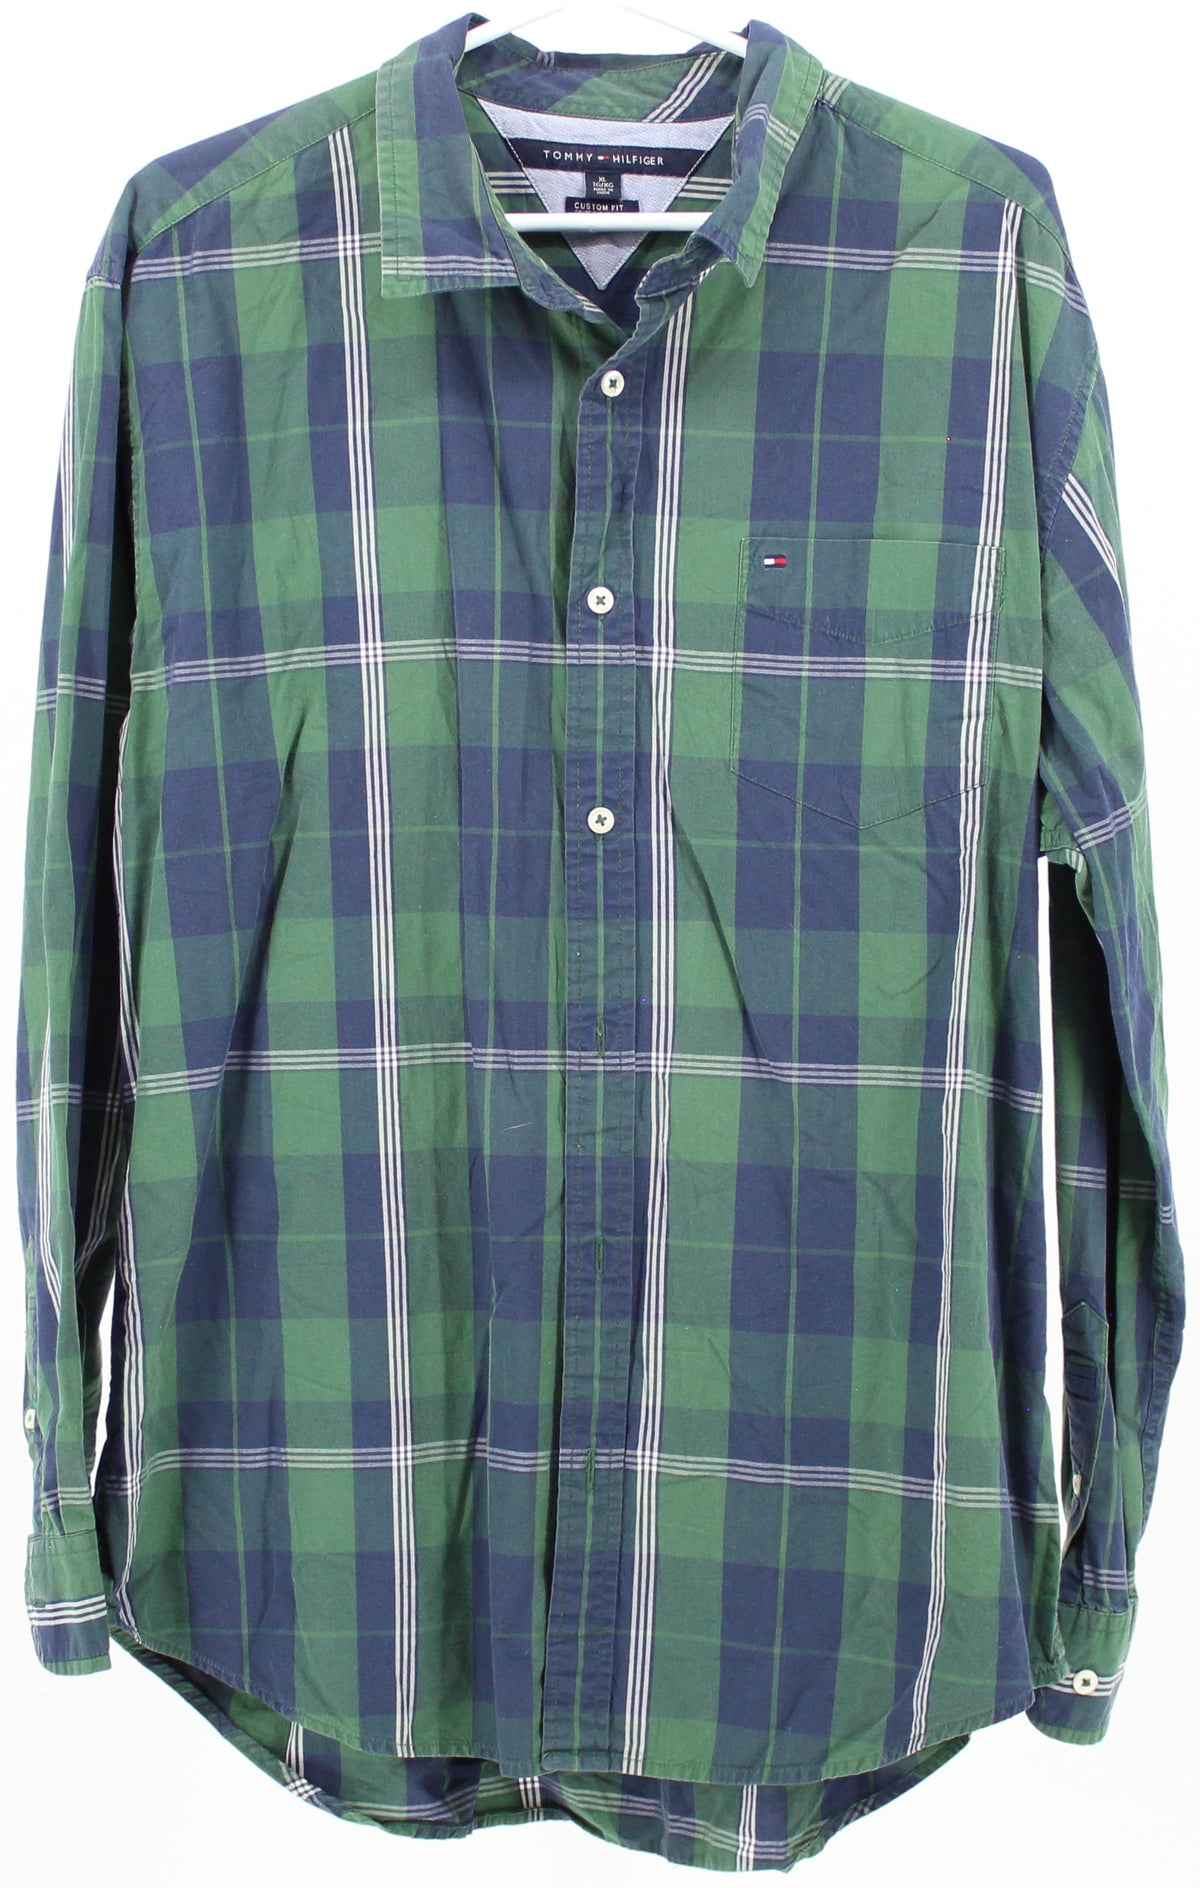 Tommy Hilfiger Blue Green and White Plaid Shirt